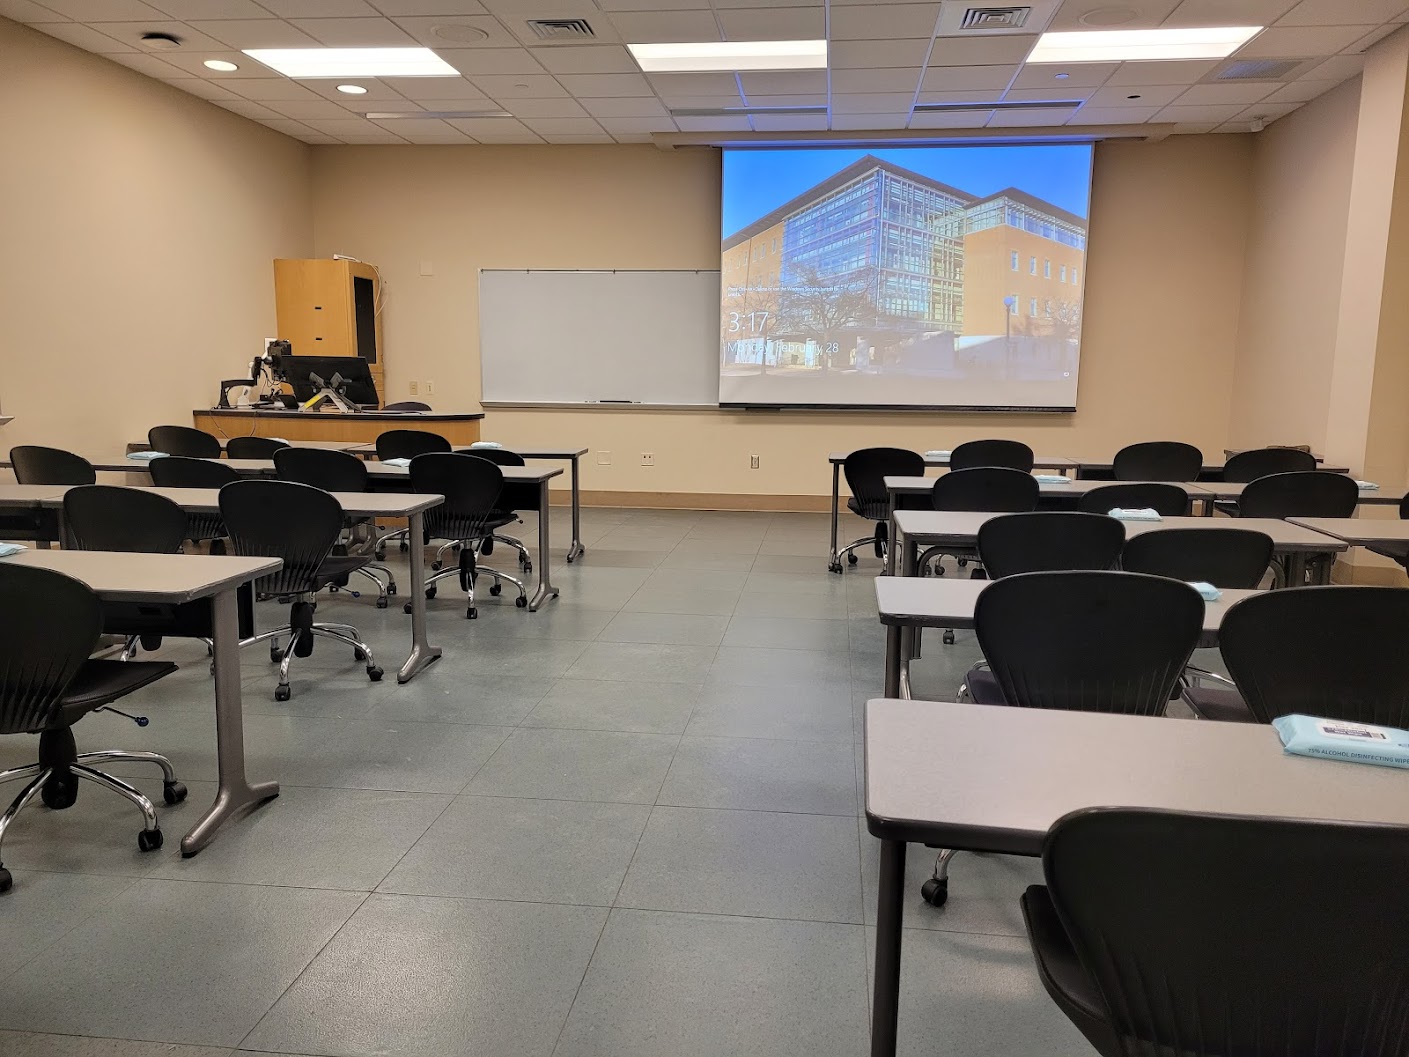 A view of the classroom with movable tables and chairs, white board, and instructor table in front.